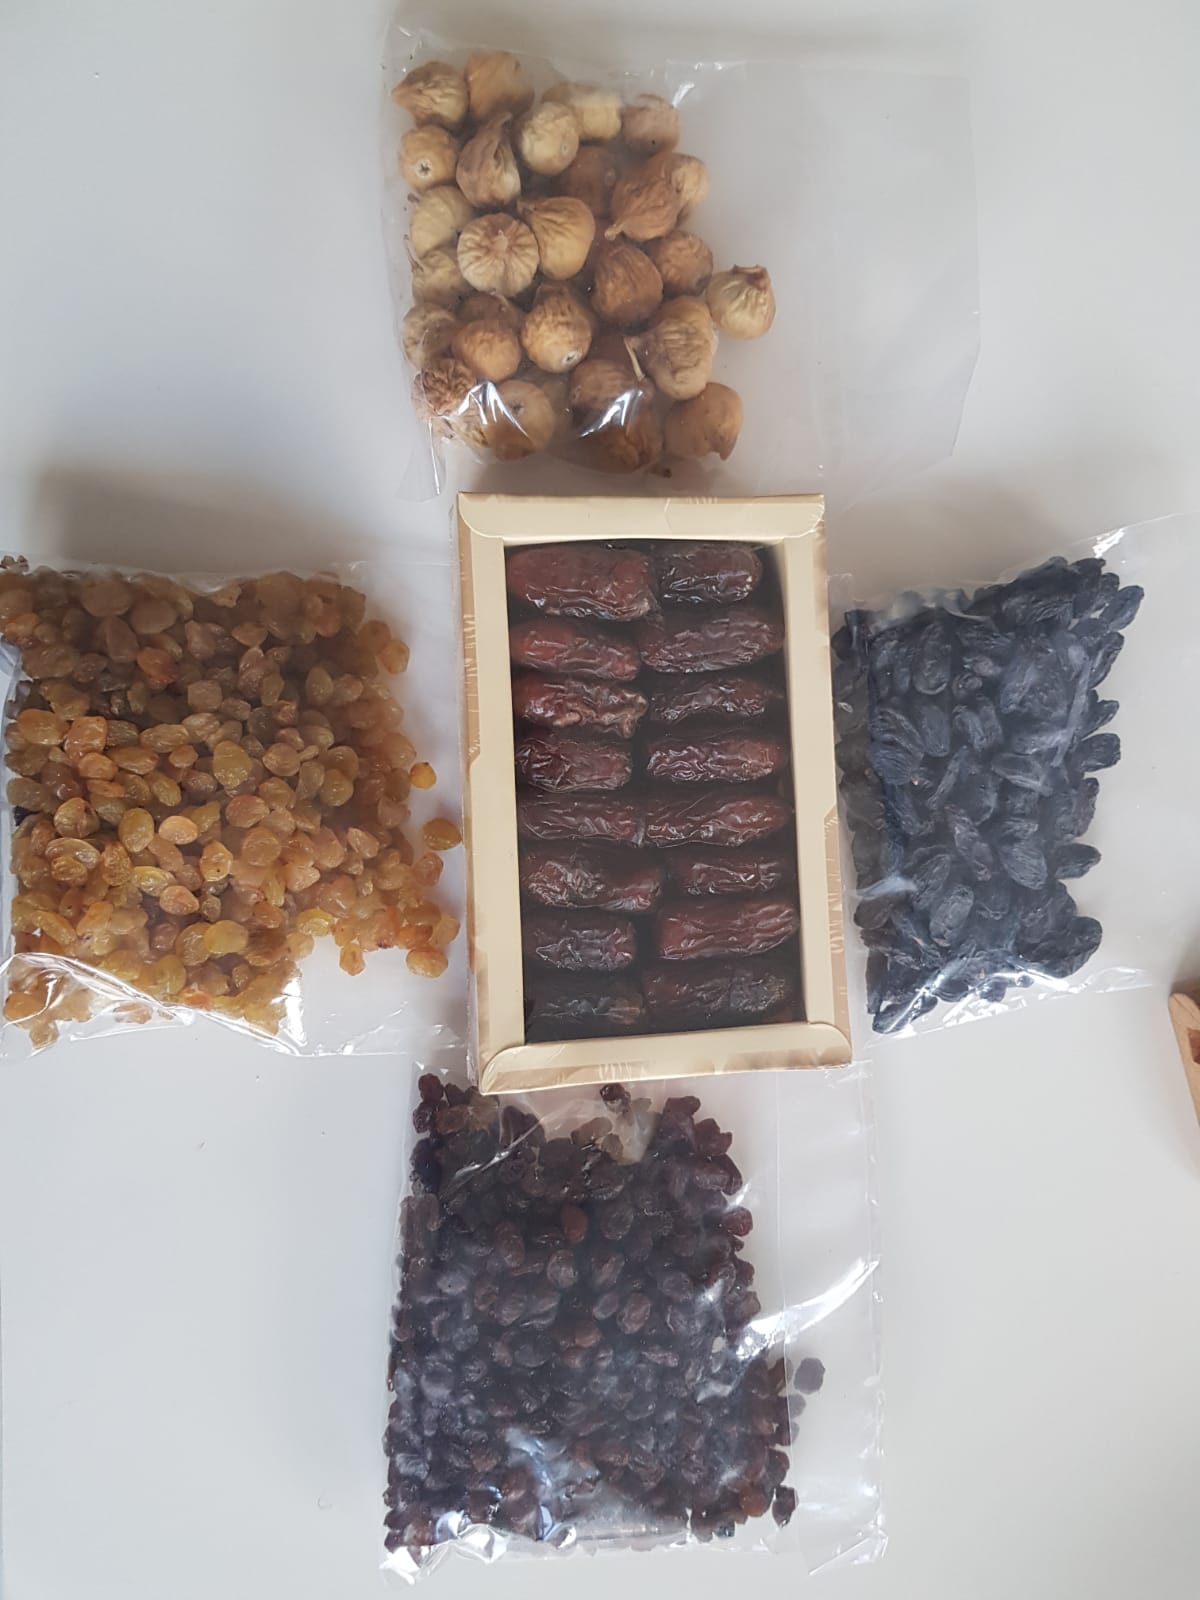 Product image - ImportTR company generally imports &exports fresh farm produce to more 15 countries. We are leading exporter of Turkish cultivated fruits and vegetables. We can provide you product as per your requirement. Offer for Dried Fruits. If you are serious to buy from us, we'll be happy to supply your needs. Kindly contact : Whatsapp- +90 533 669 13 89 Email: sumar@importtr.com